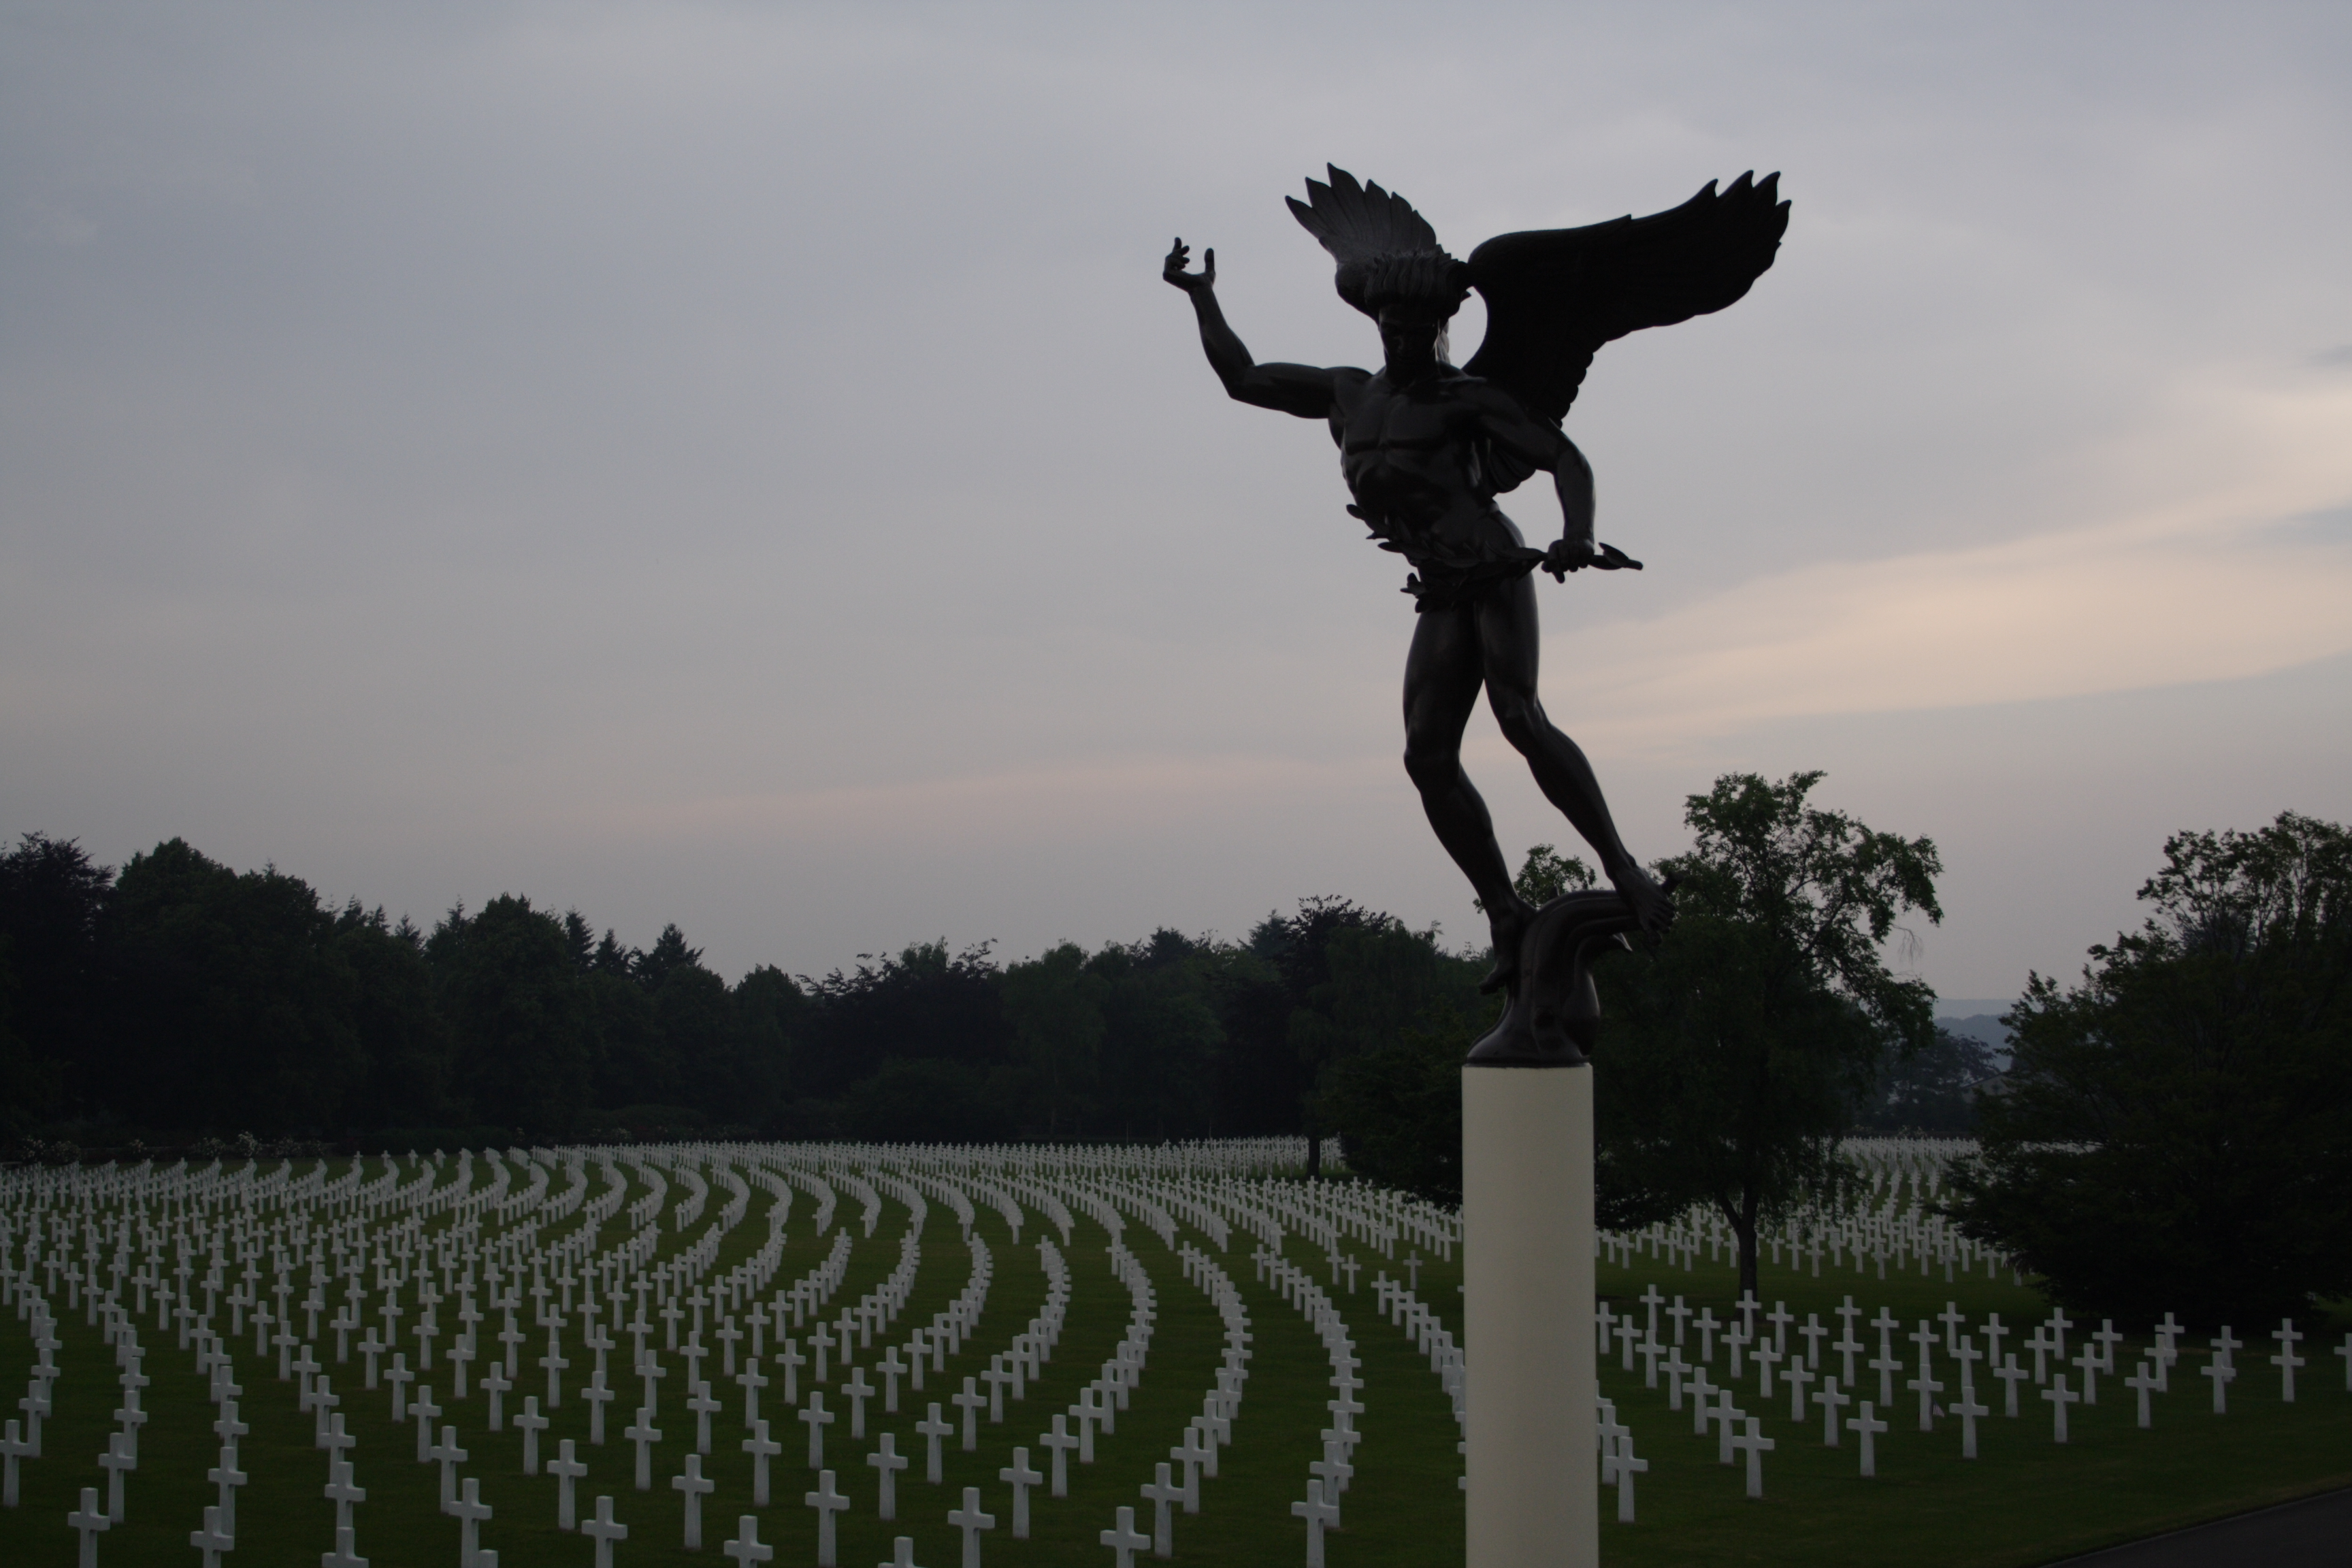 An angel statue looks over the rows of headstones at Henri-Chapelle American Cemetery.